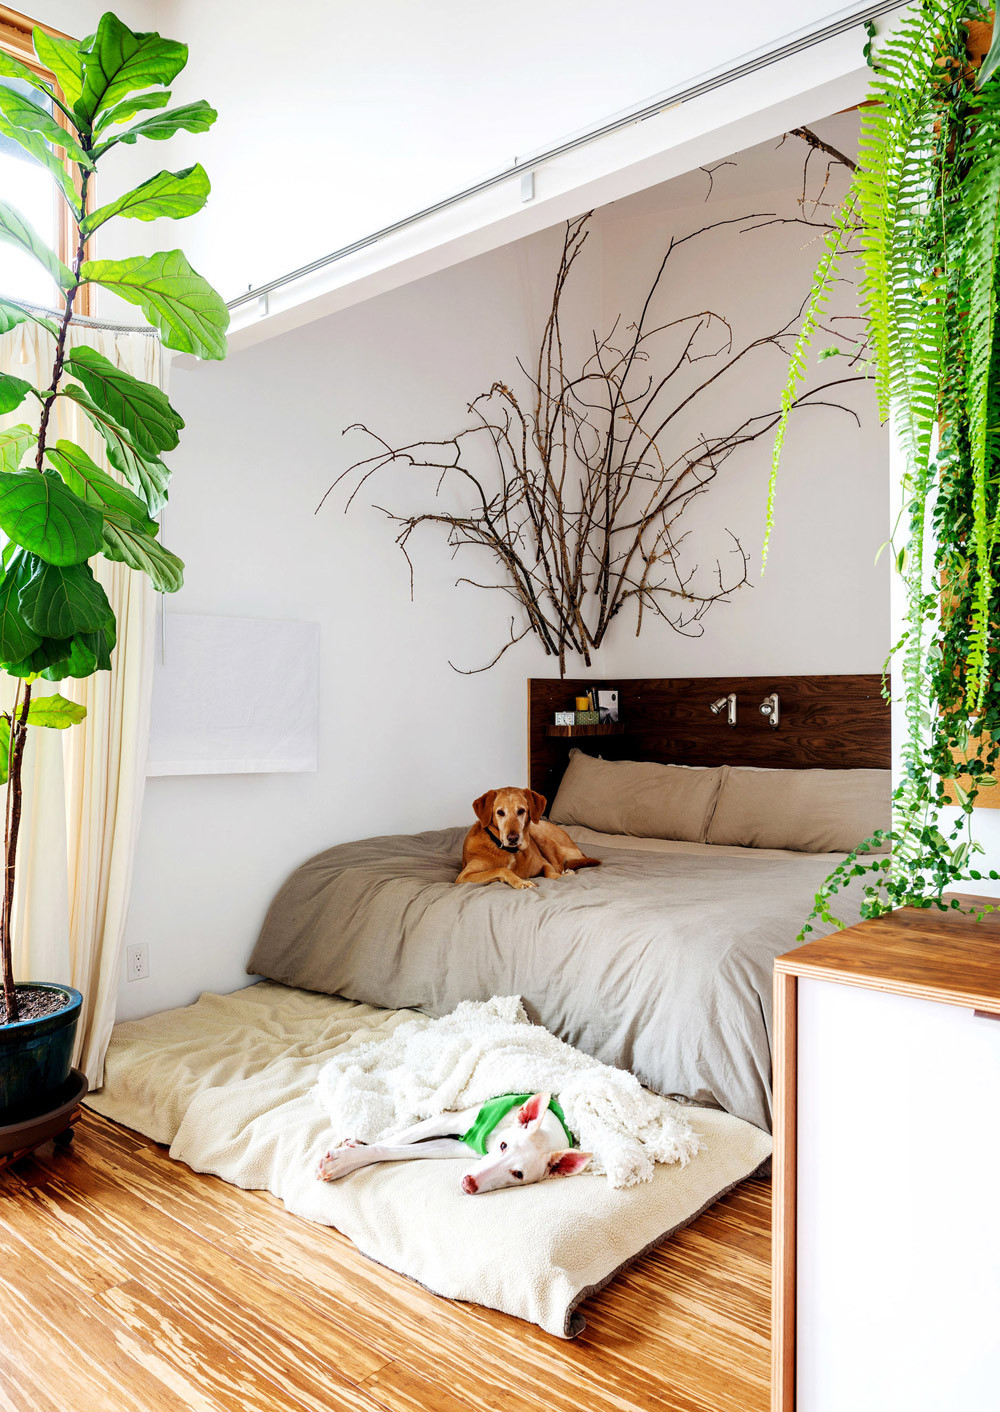 Small Plants For Bedroom
 Design Highlight Bedrooms Using Live Plants as Decor